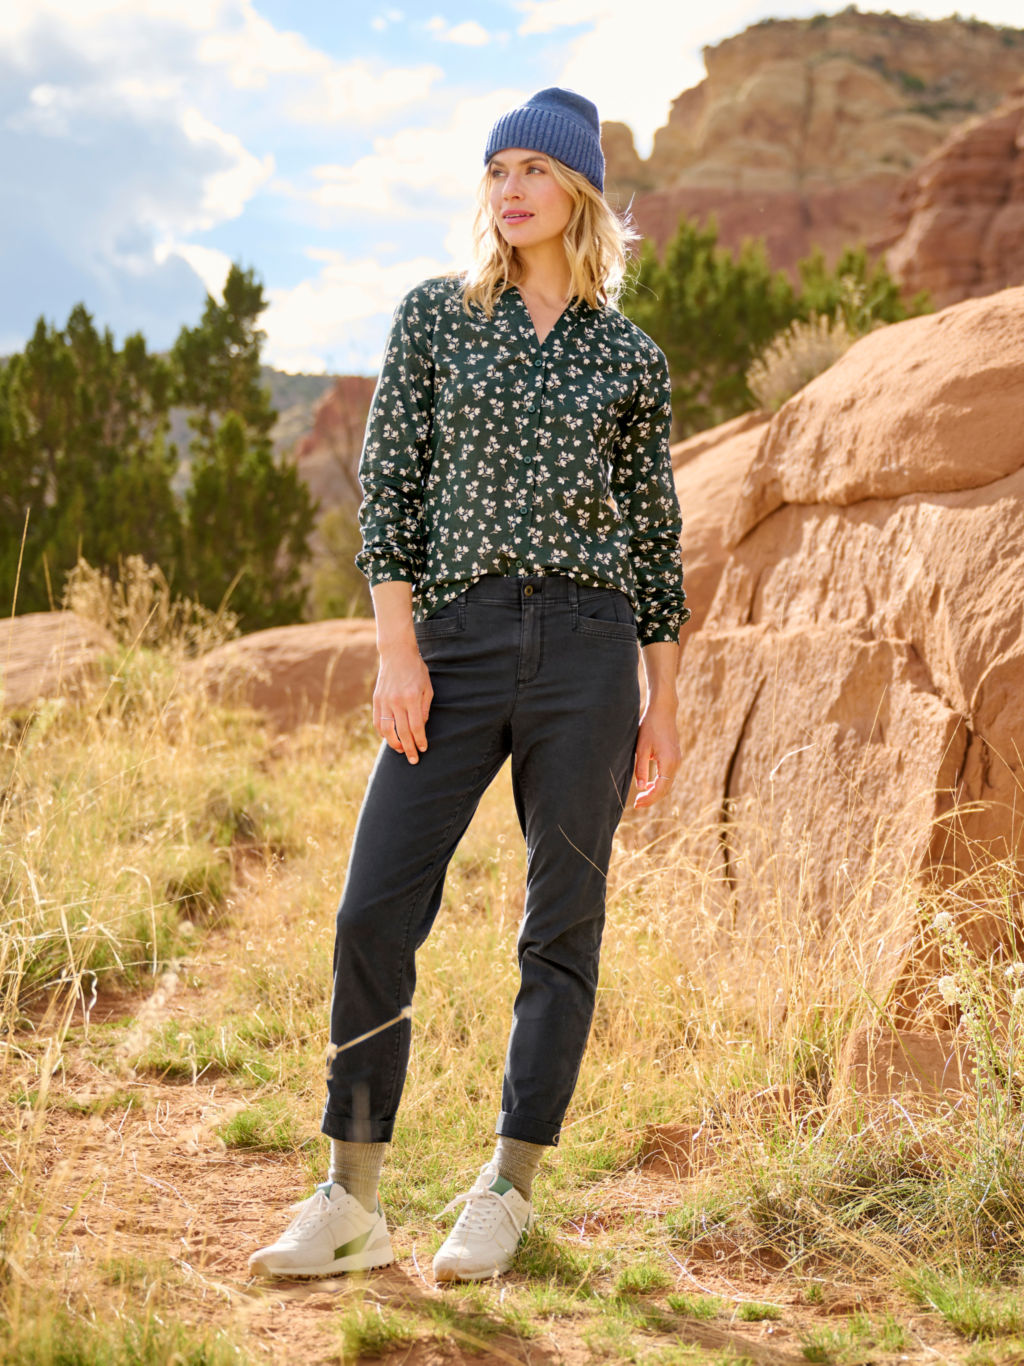 A woman in a green flowered shirt pauses mid-hike in tall dry grass.